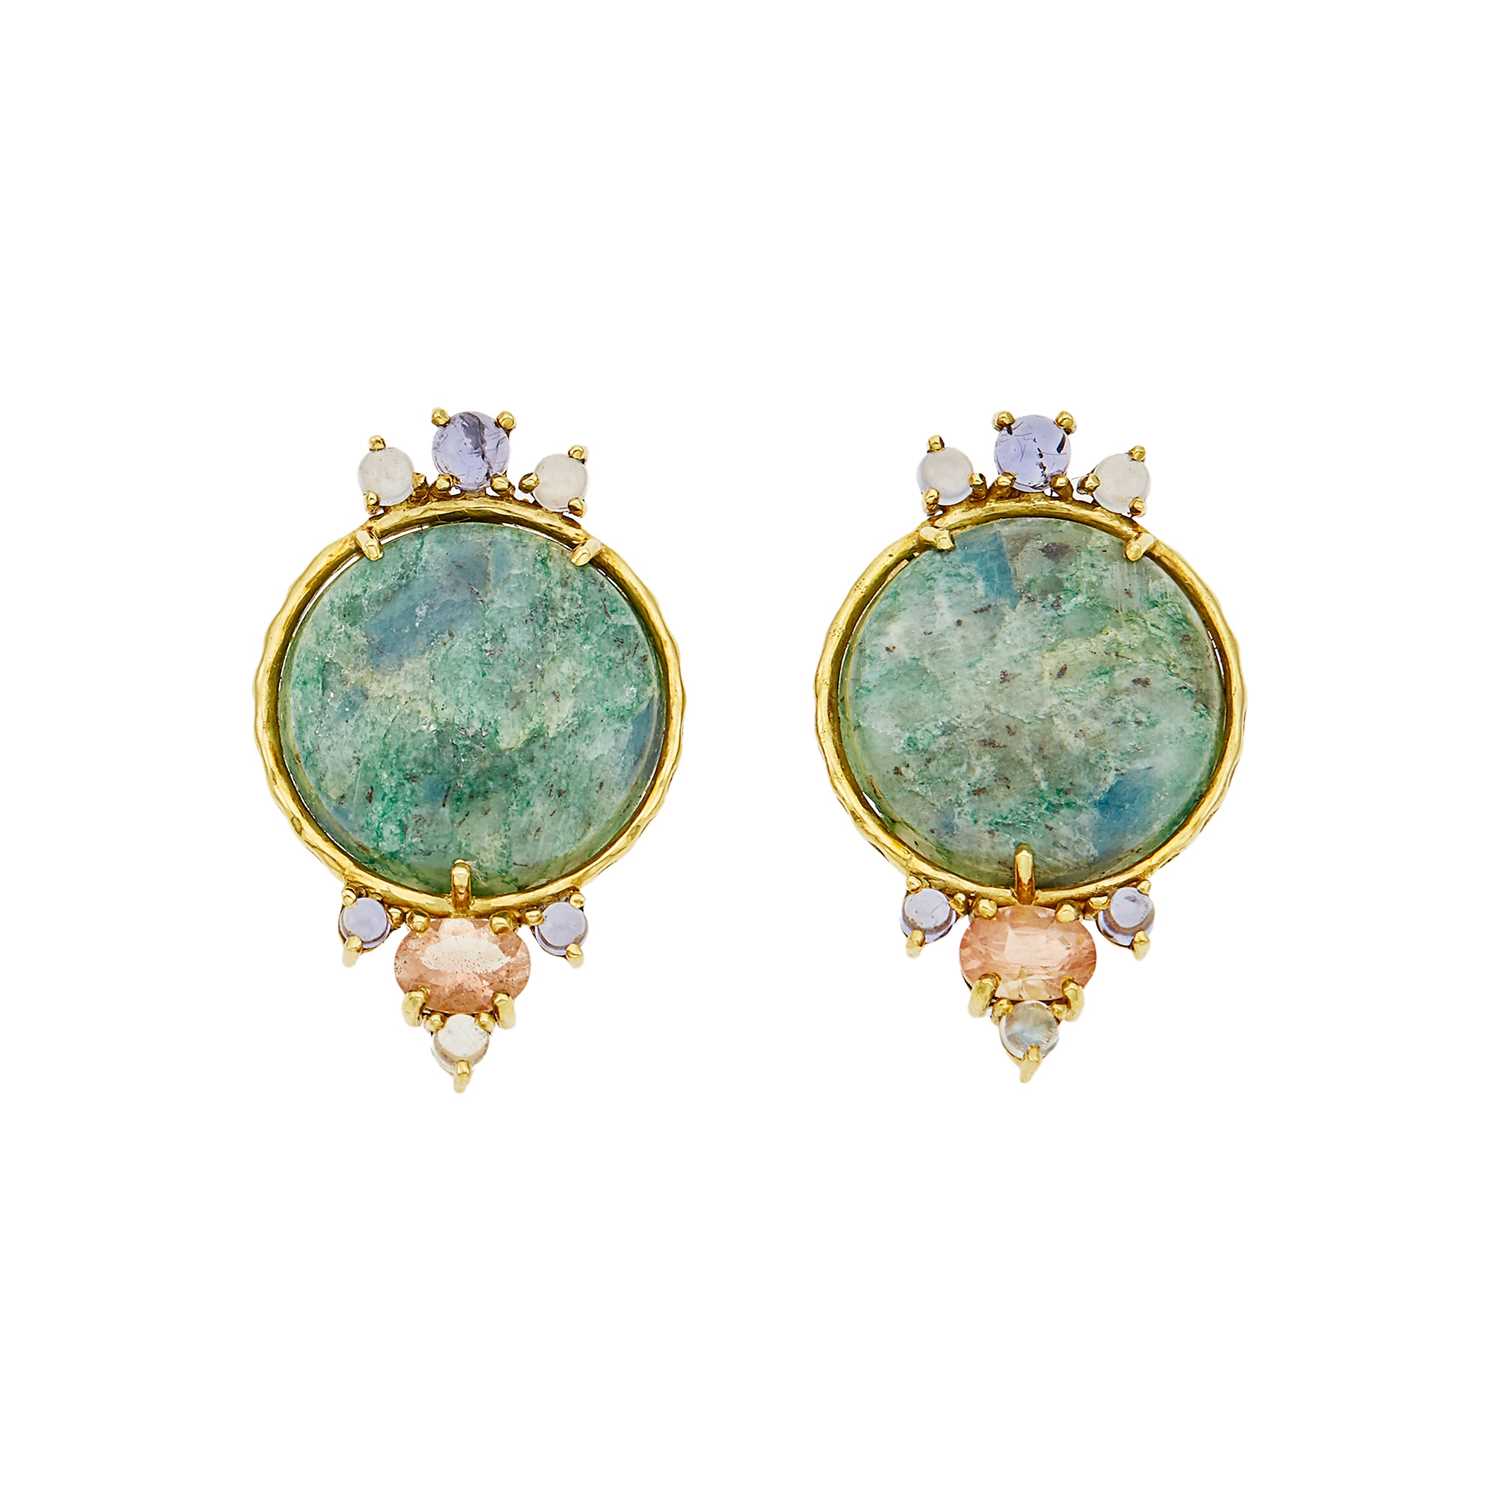 Lot 1076 - Attributed to Daria de Koning Pair of Gold, Fuchsite and Colored Stone Earclips